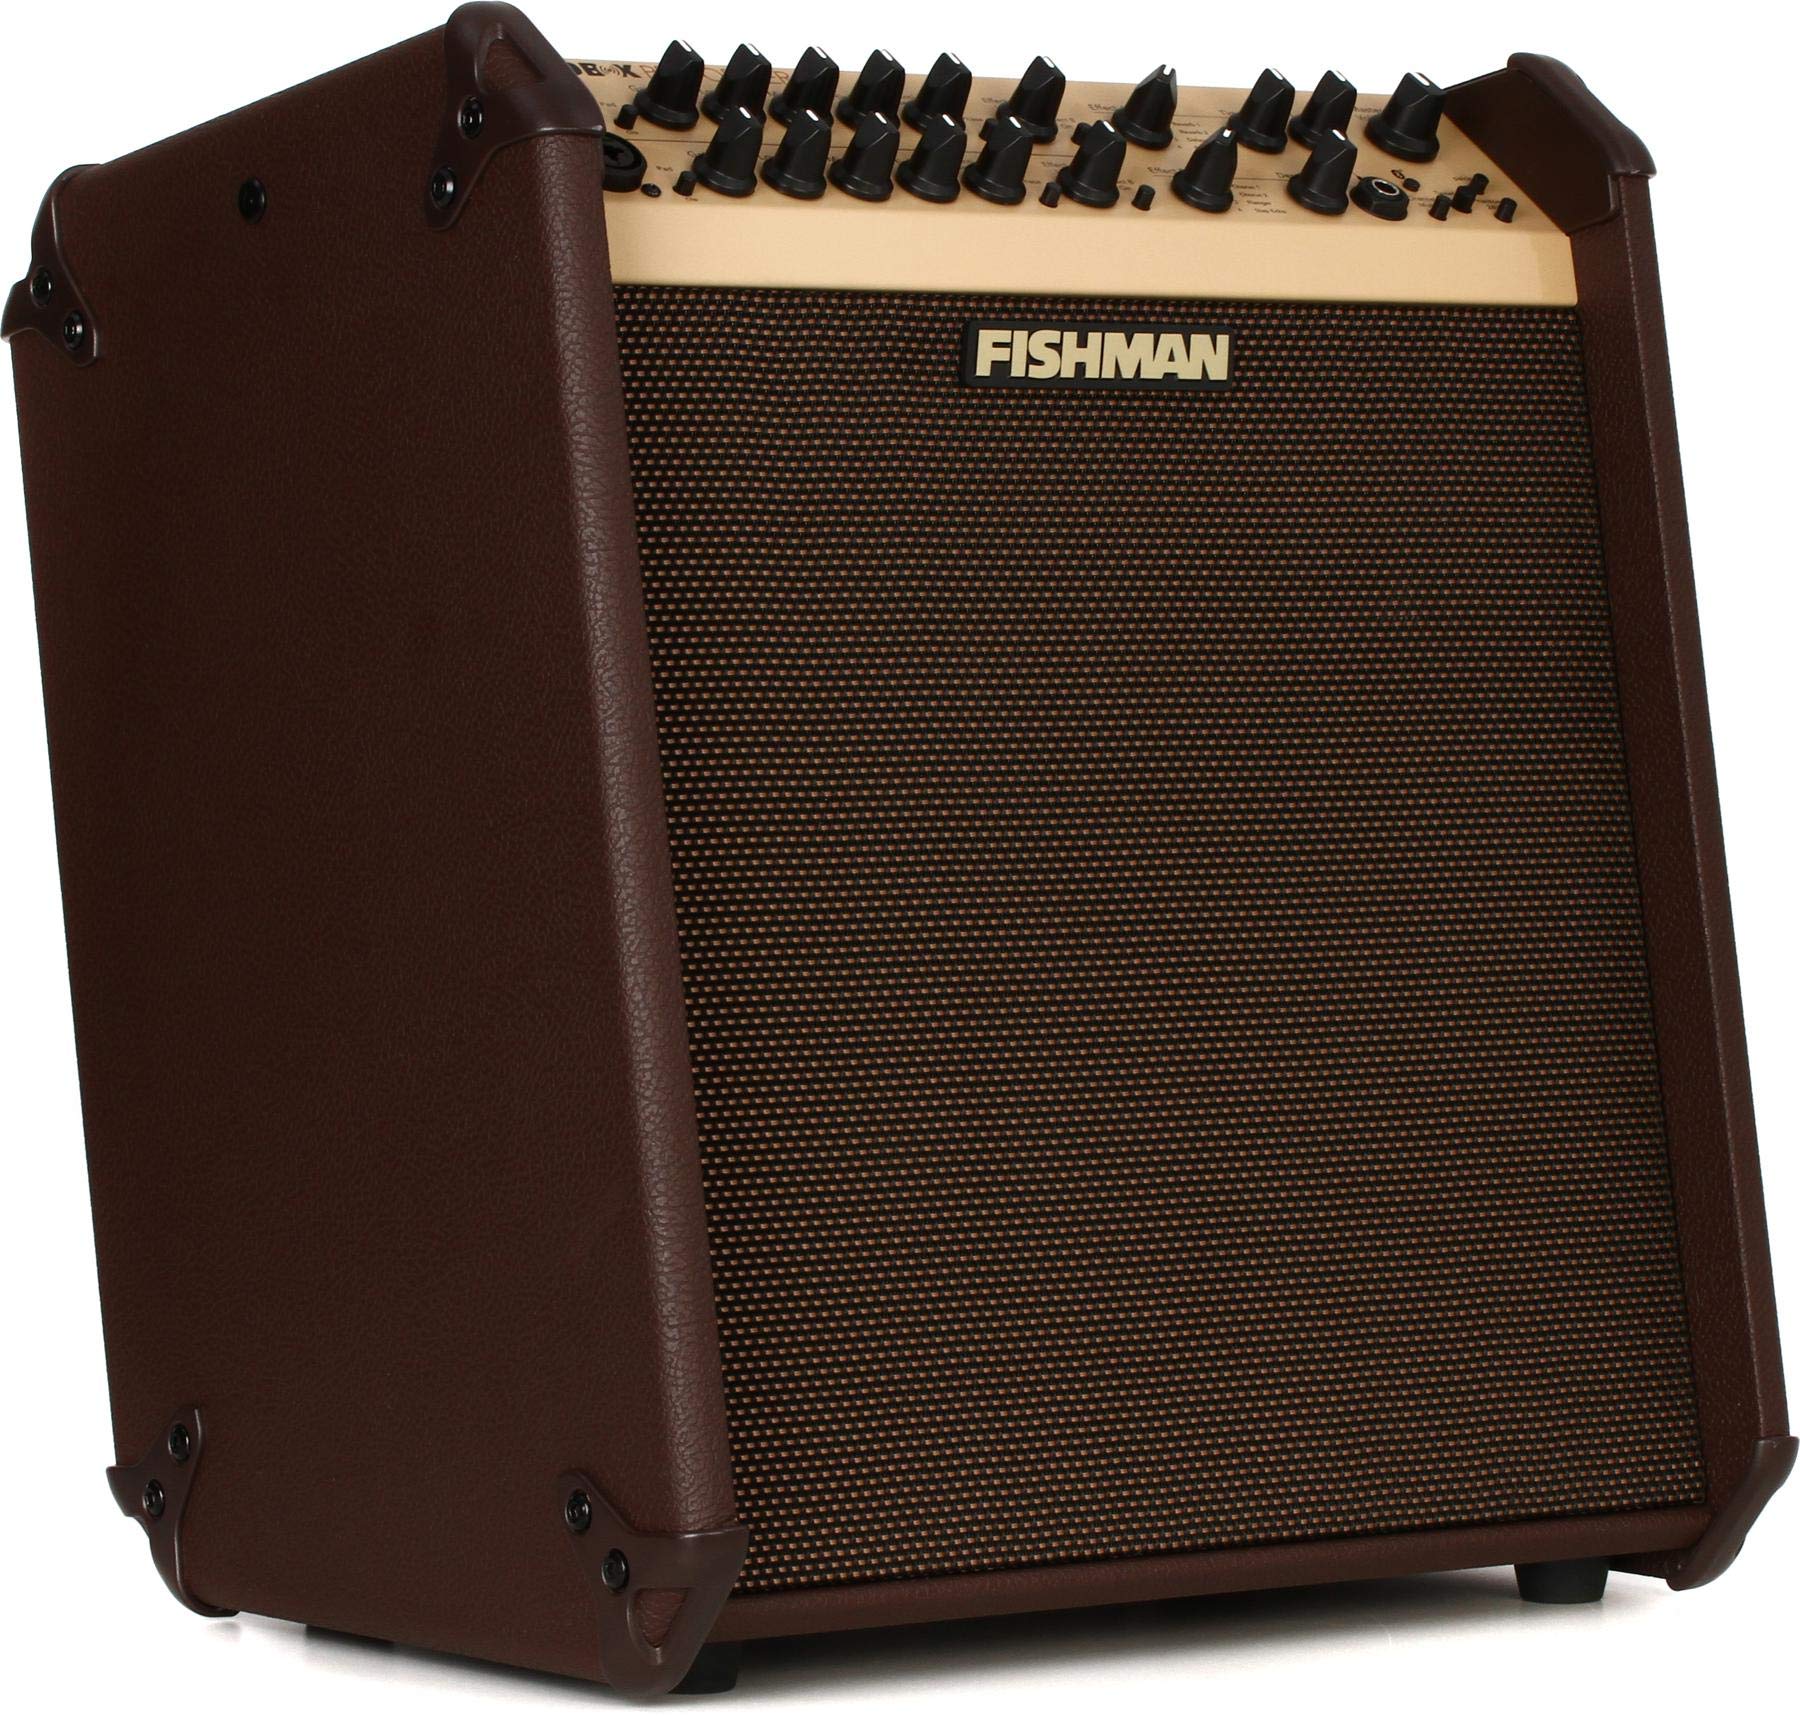 Fishman Loudbox Performer BT 180-Watt 1x5 Inches + 1x8 Inches Acoustic Combo Amp with Tweeter